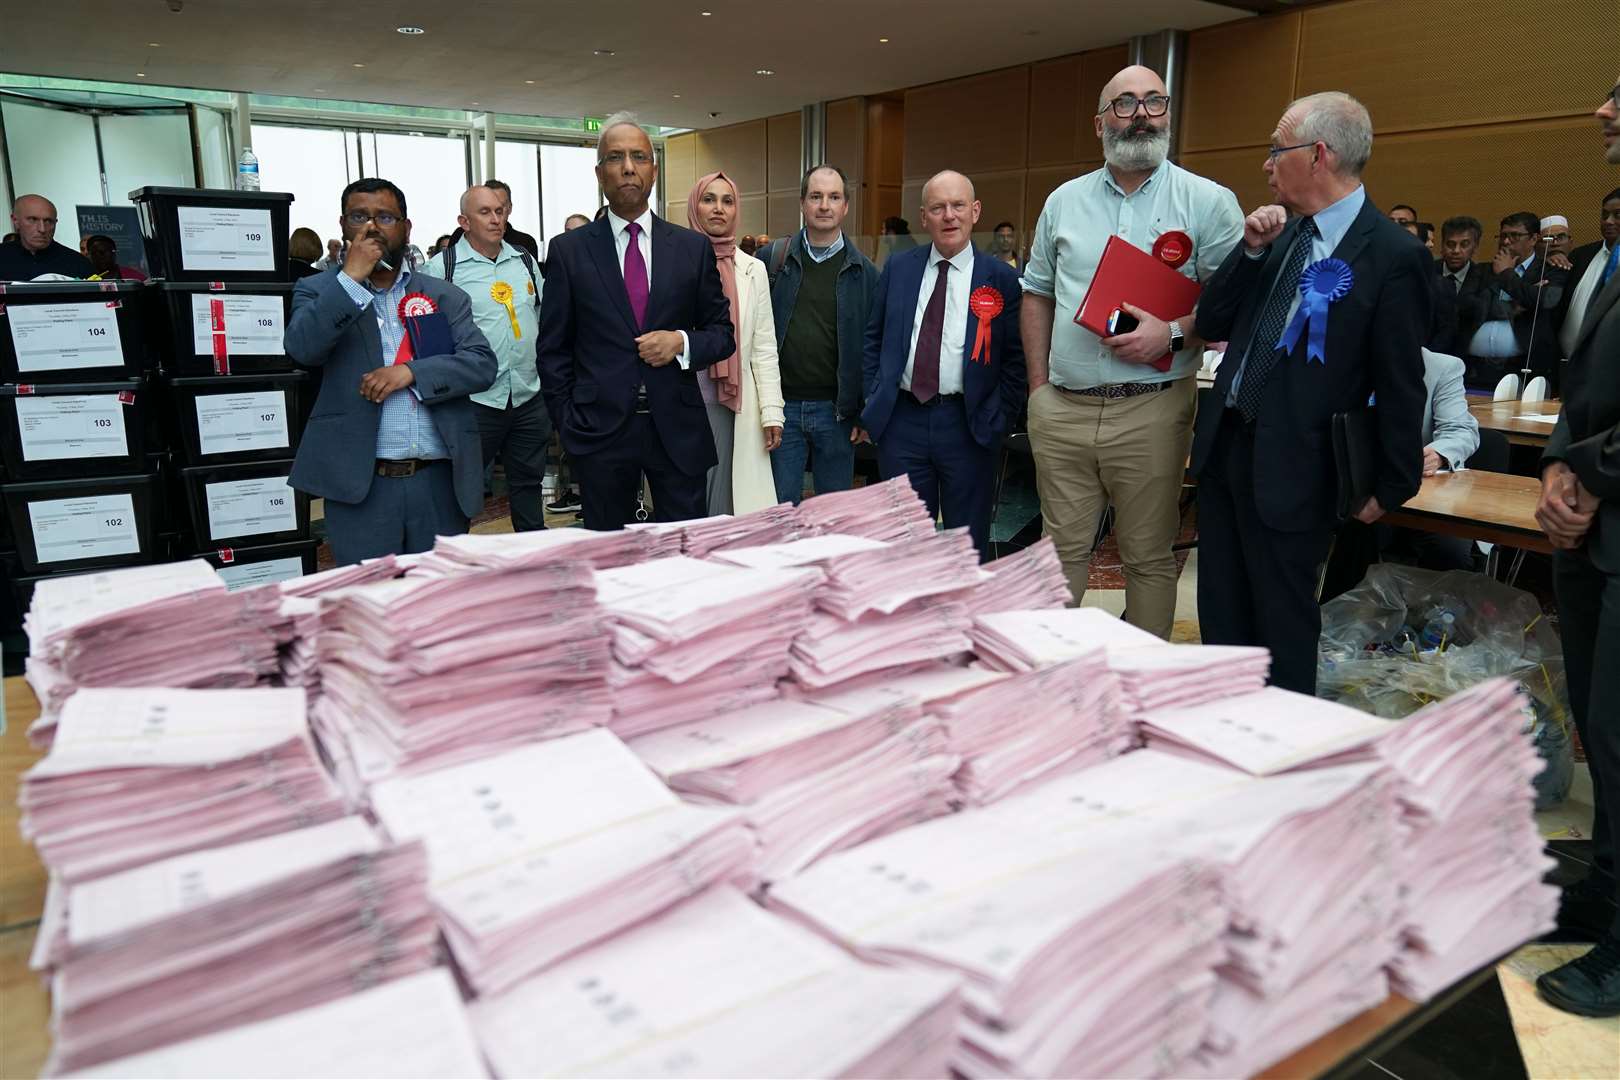 Lutfur Rahman (second left) and John Biggs (third right) waiting for the results (Aaron Chown/PA)